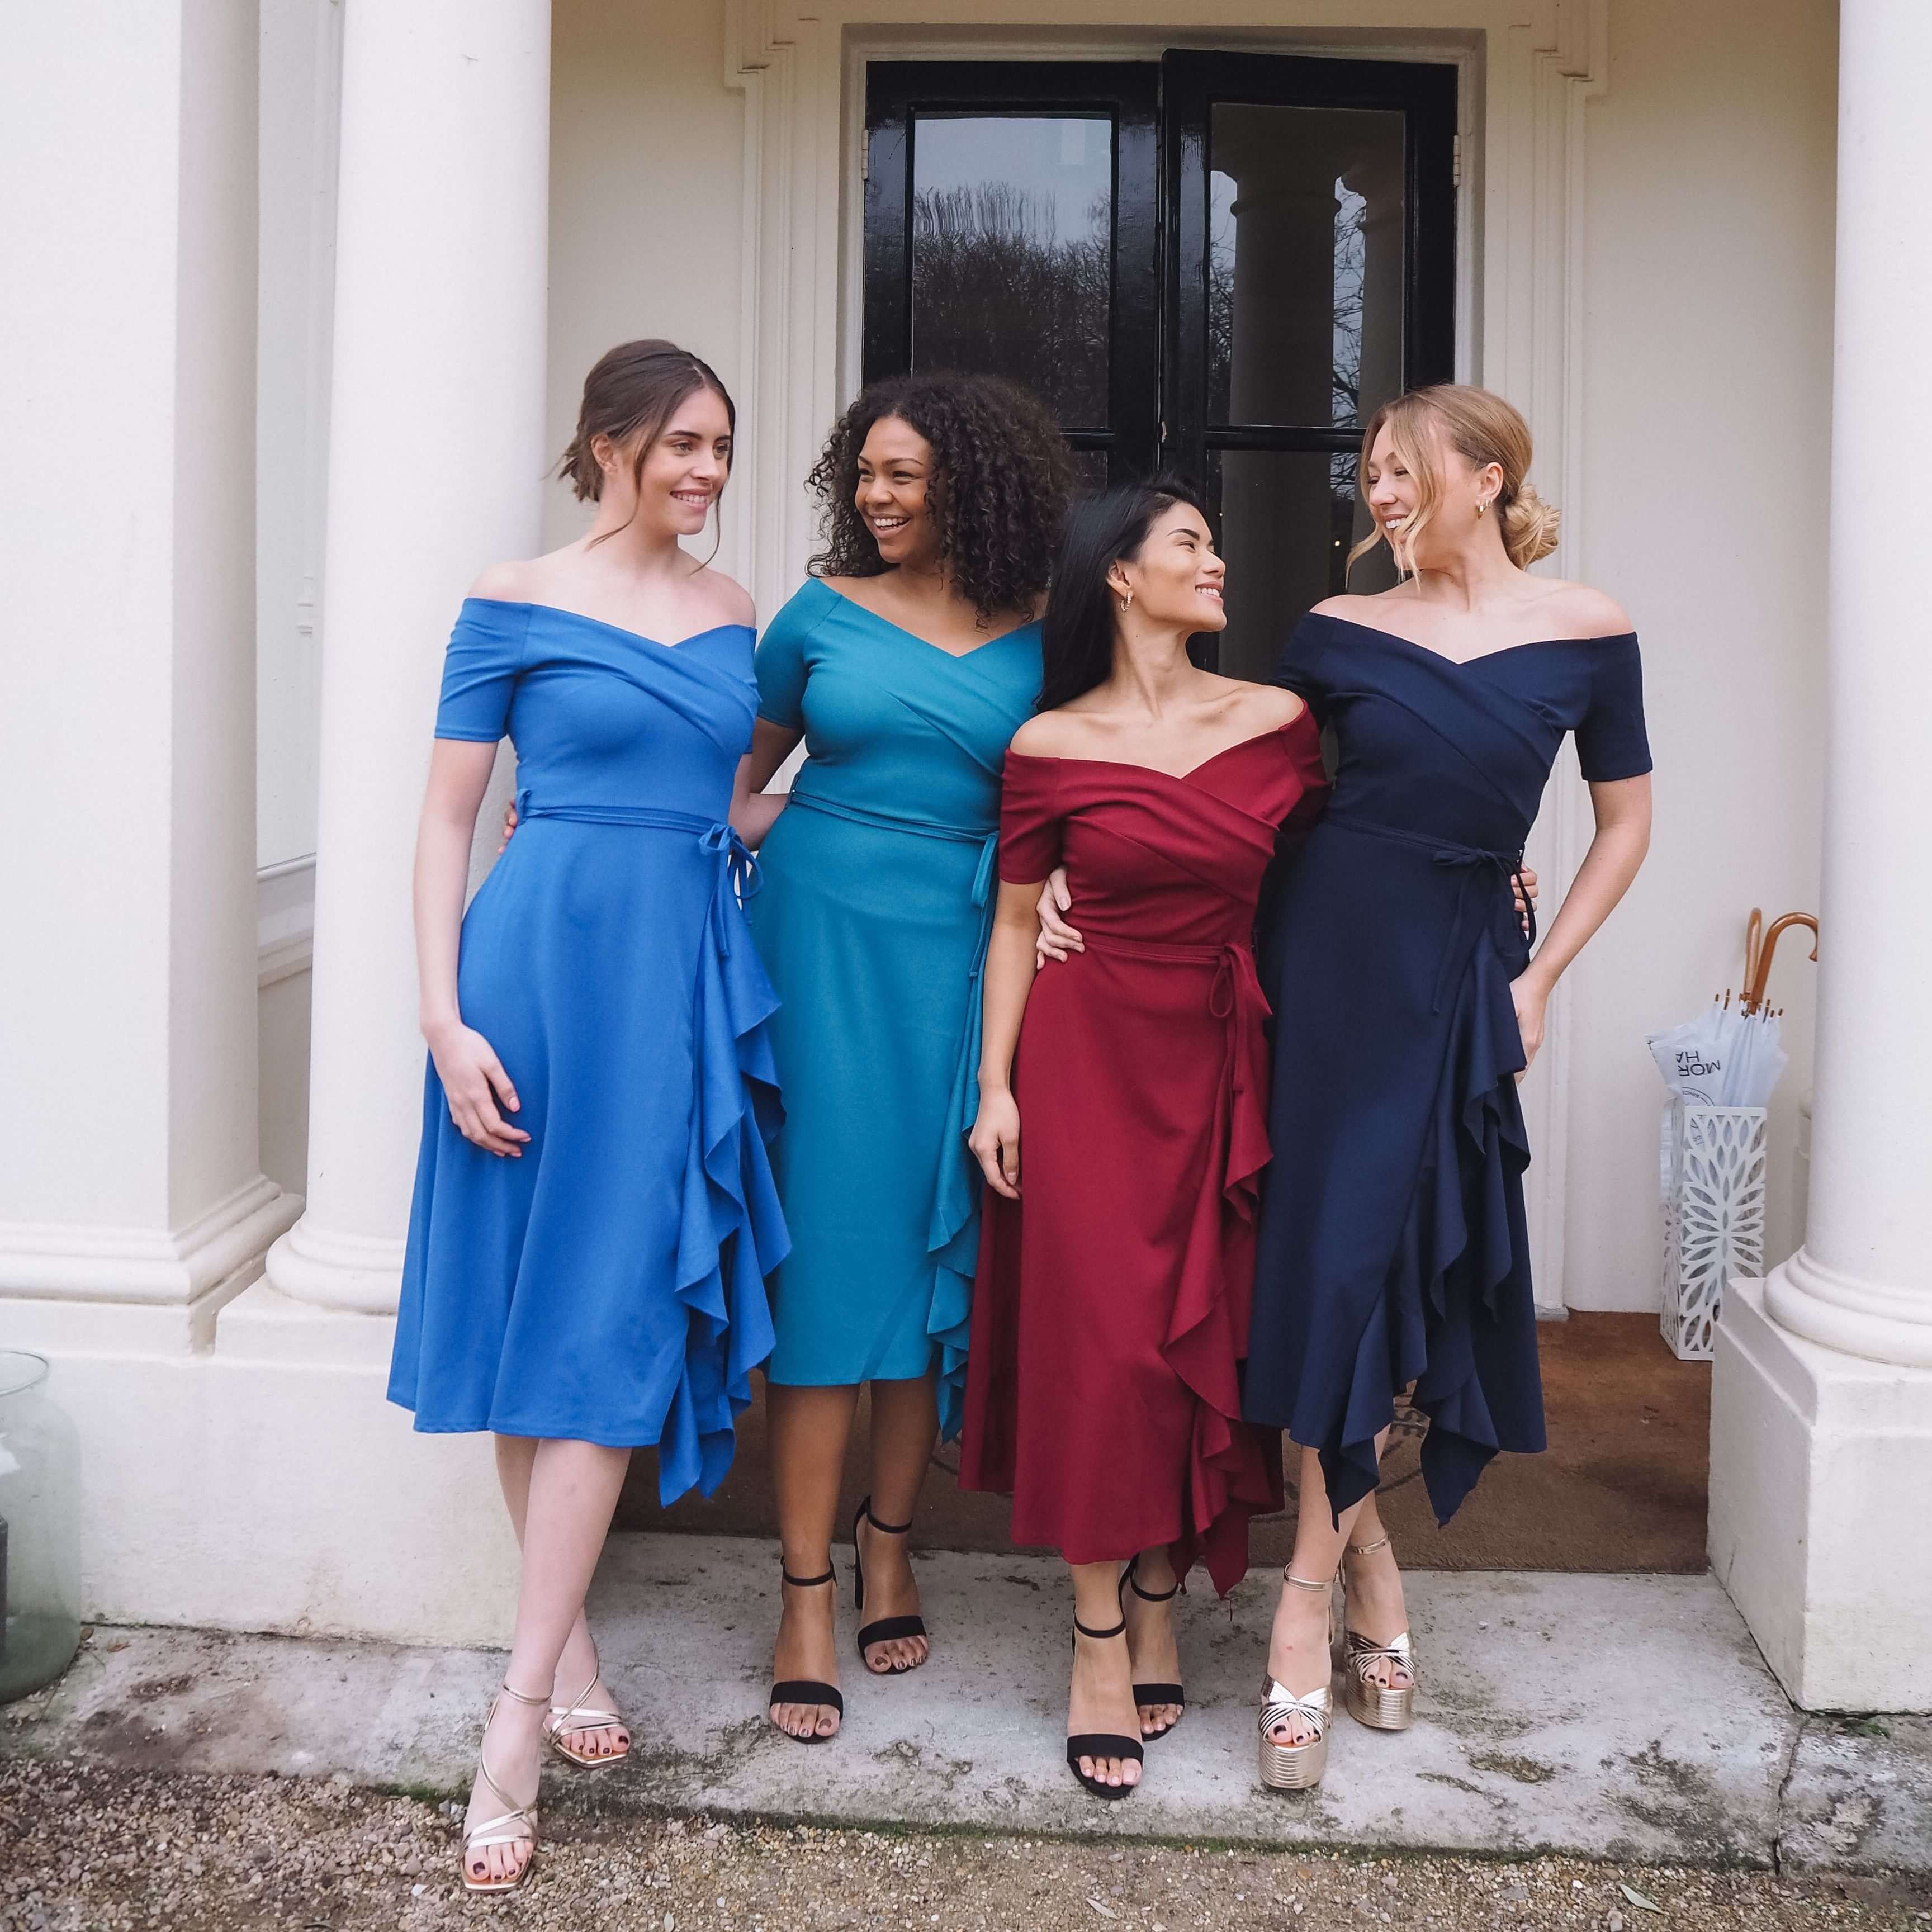 40 Chic Winter Wedding Guest Dresses for Every Budget - hitched.co